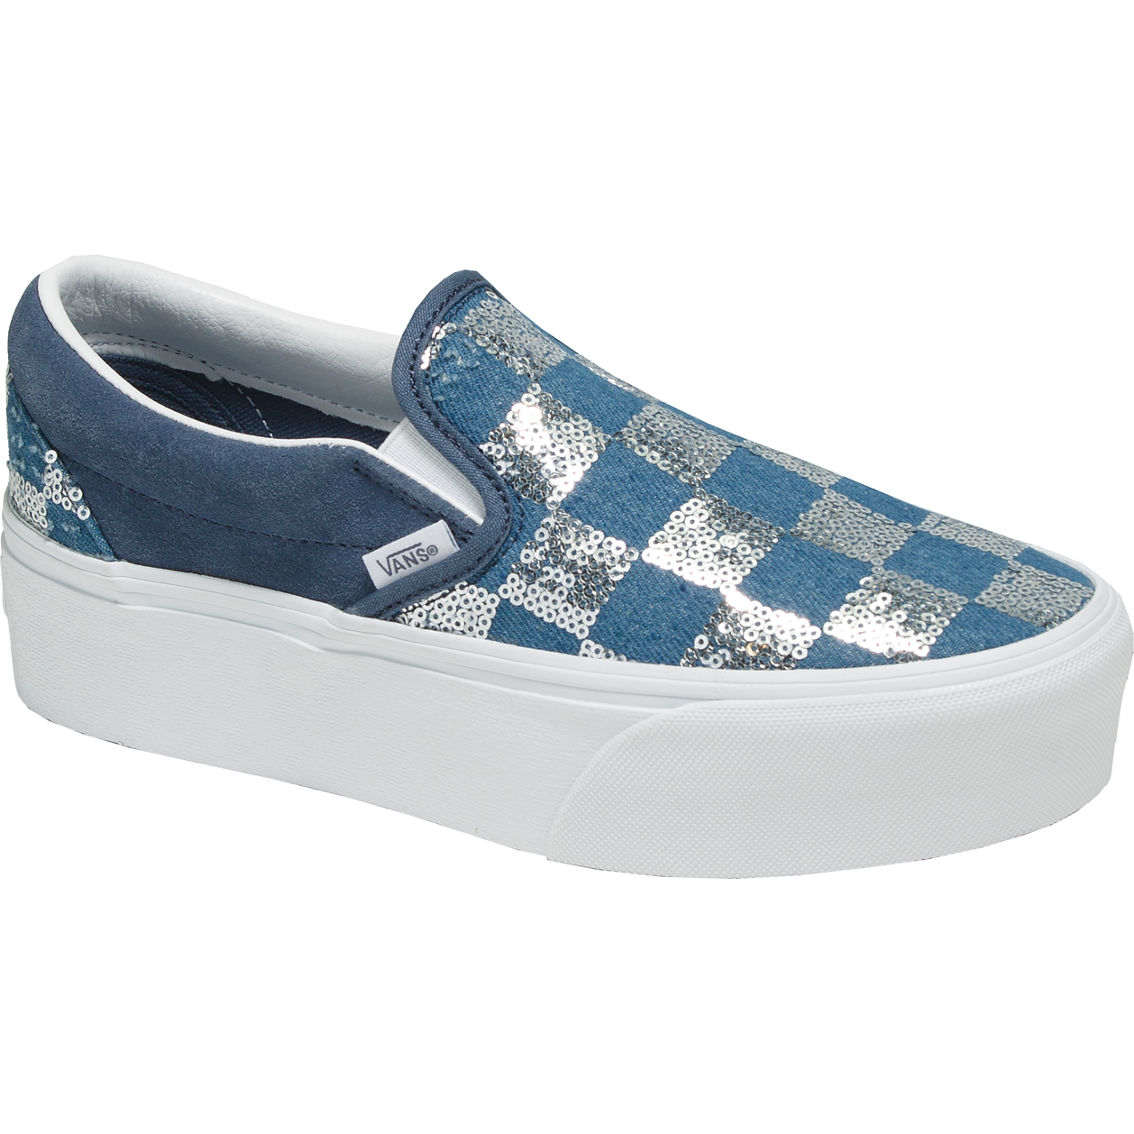 Vans Classic Slip On Stackform Glimmer Check Shoes - Image 1 of 4